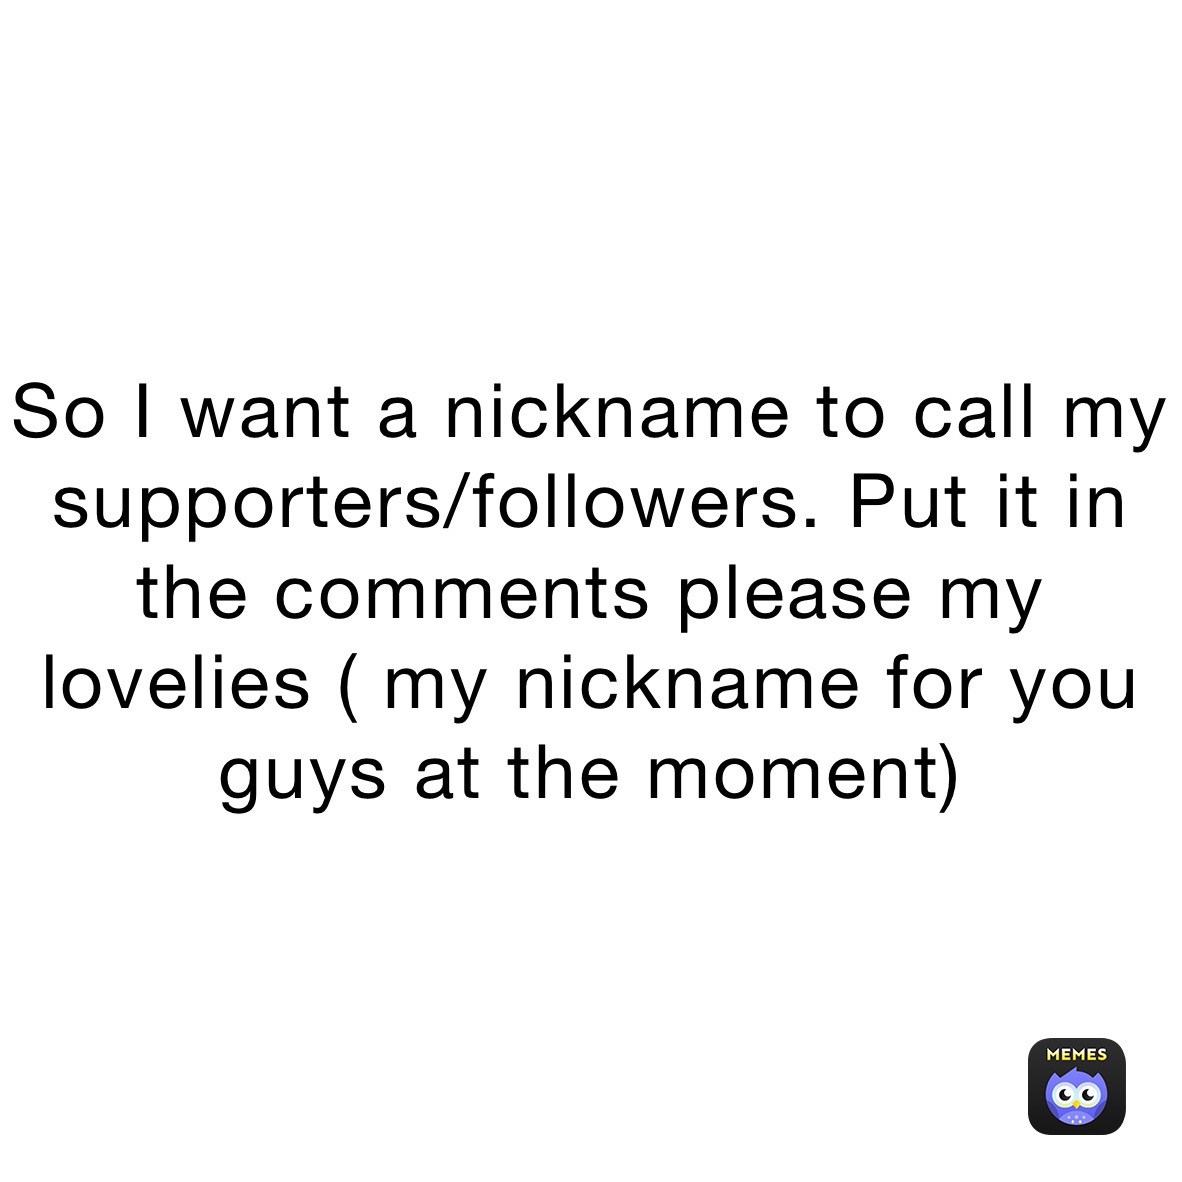 So I want a nickname to call my supporters/followers. Put it in the comments please my lovelies ( my nickname for you guys at the moment)